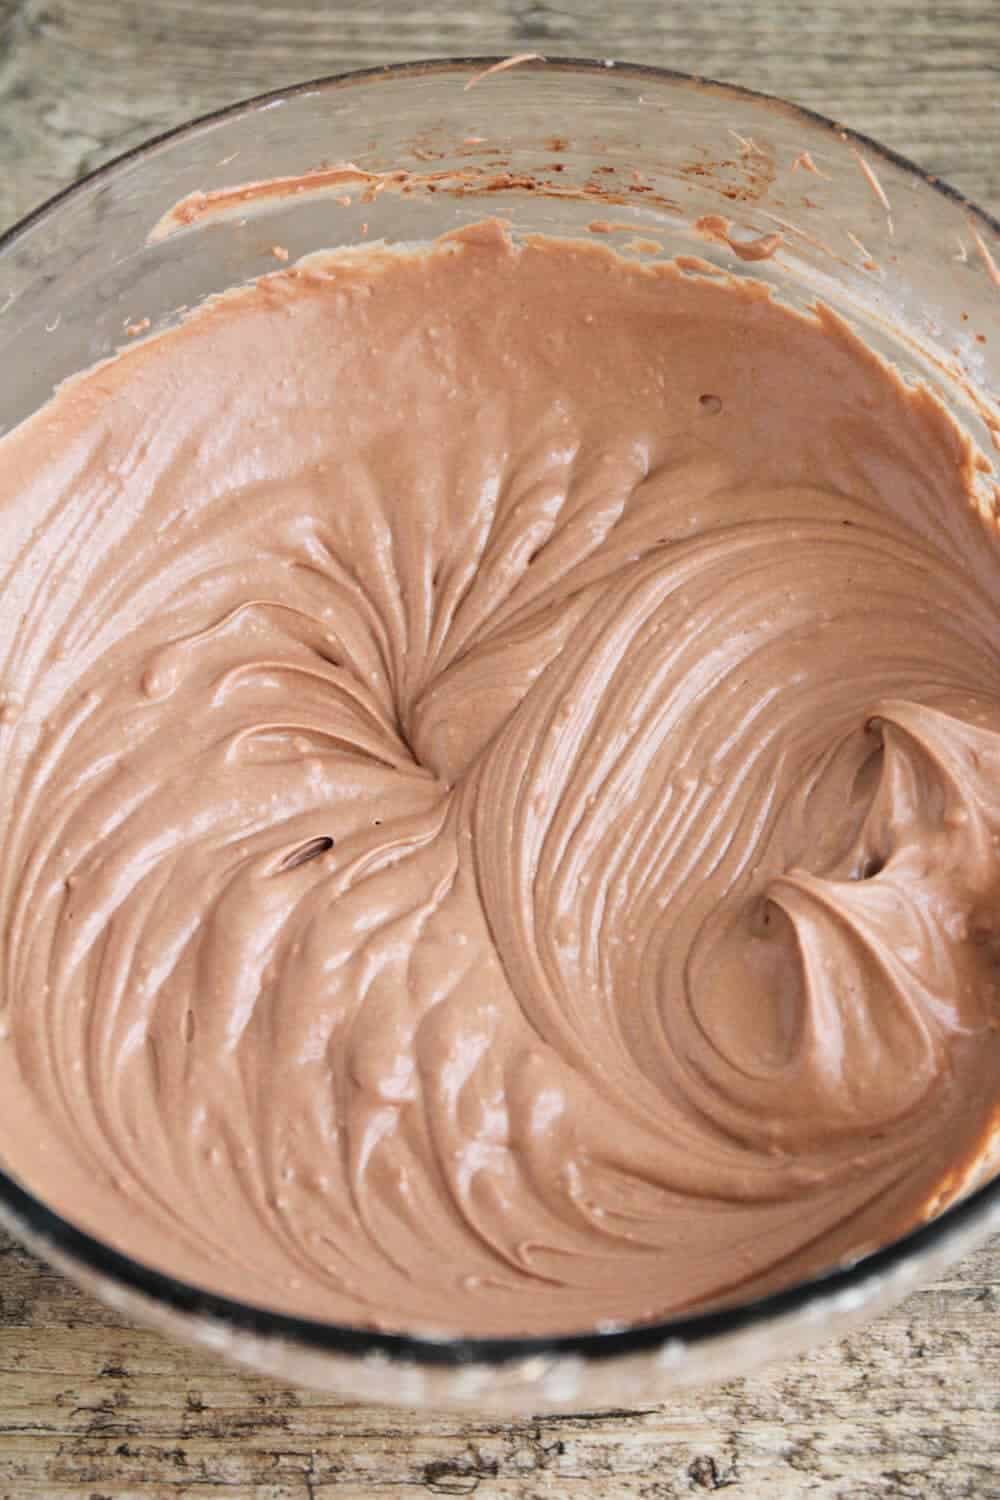 Peanut butter cheesecake filling in a glass bowl.